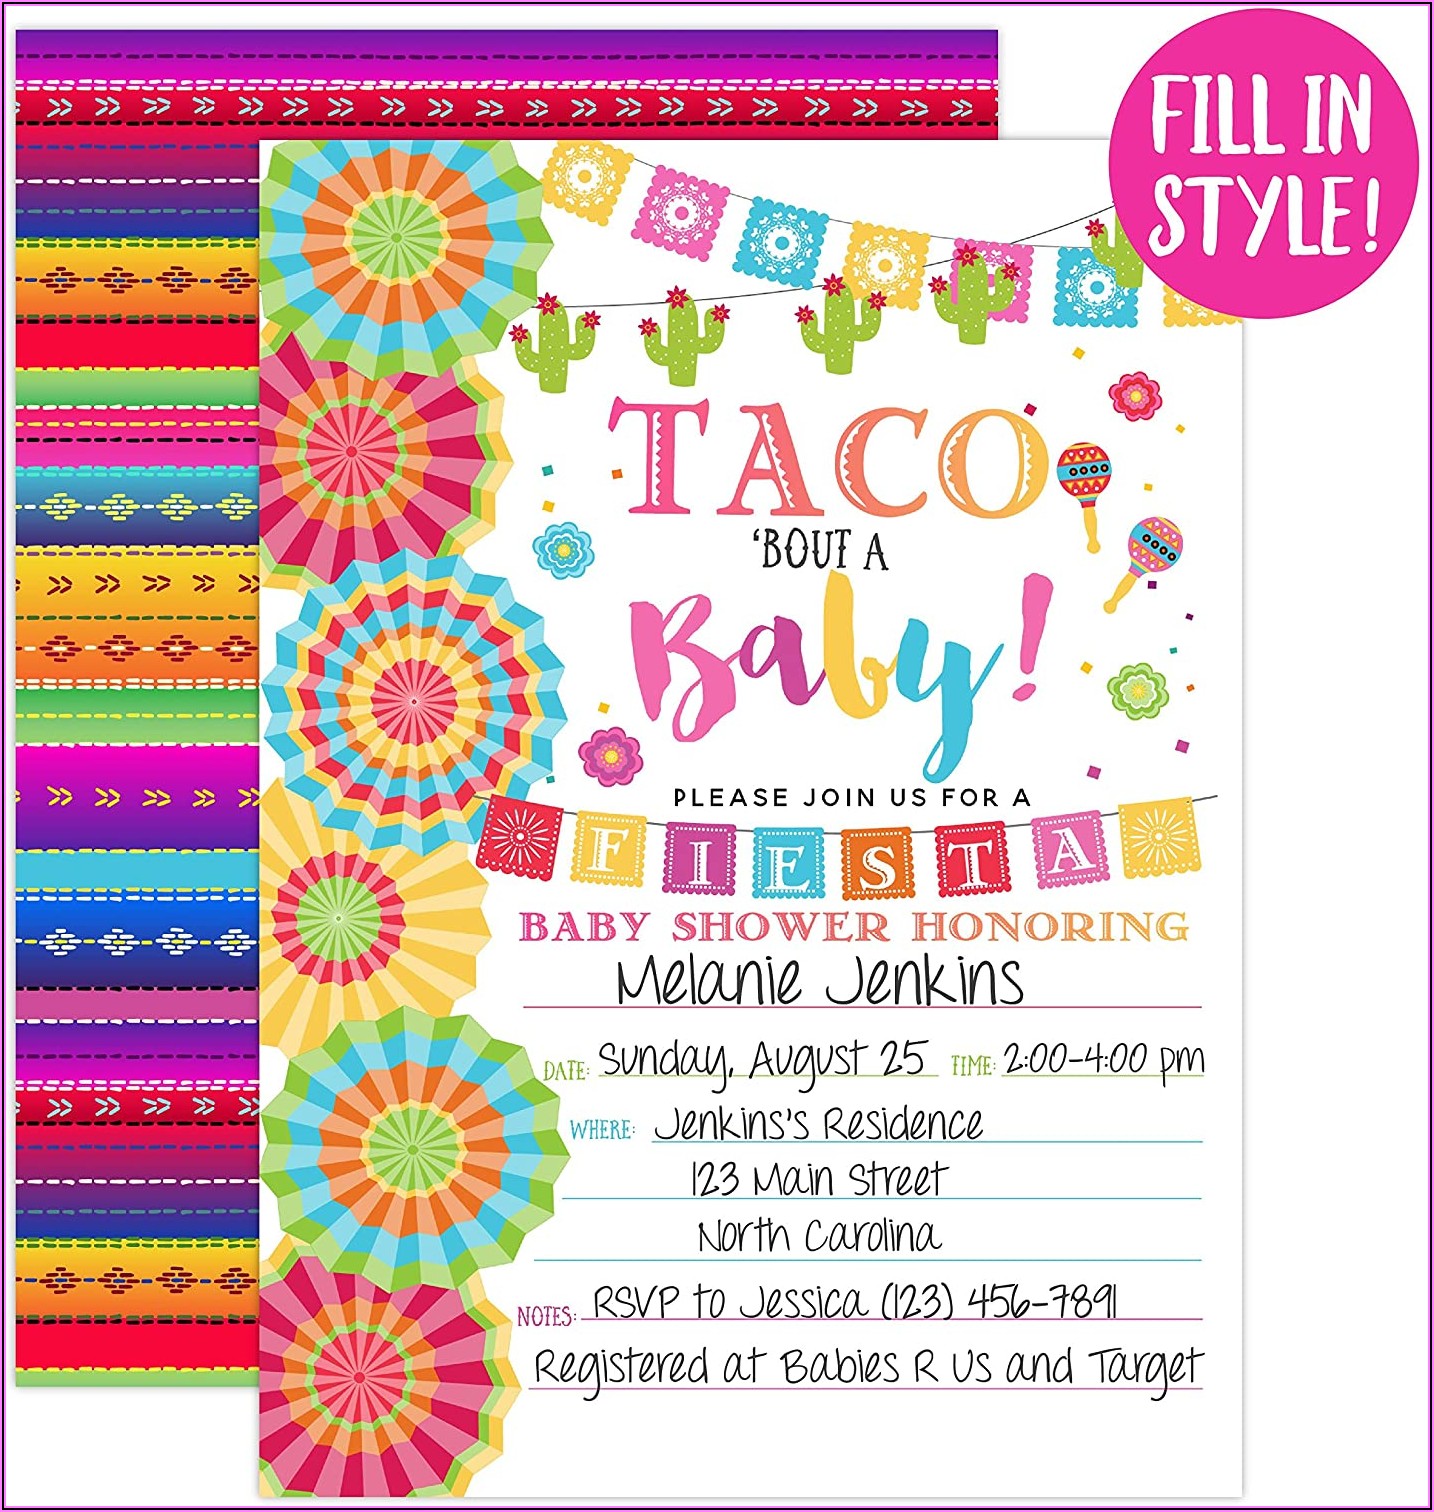 Taco Bout A Baby Invitation Free Template